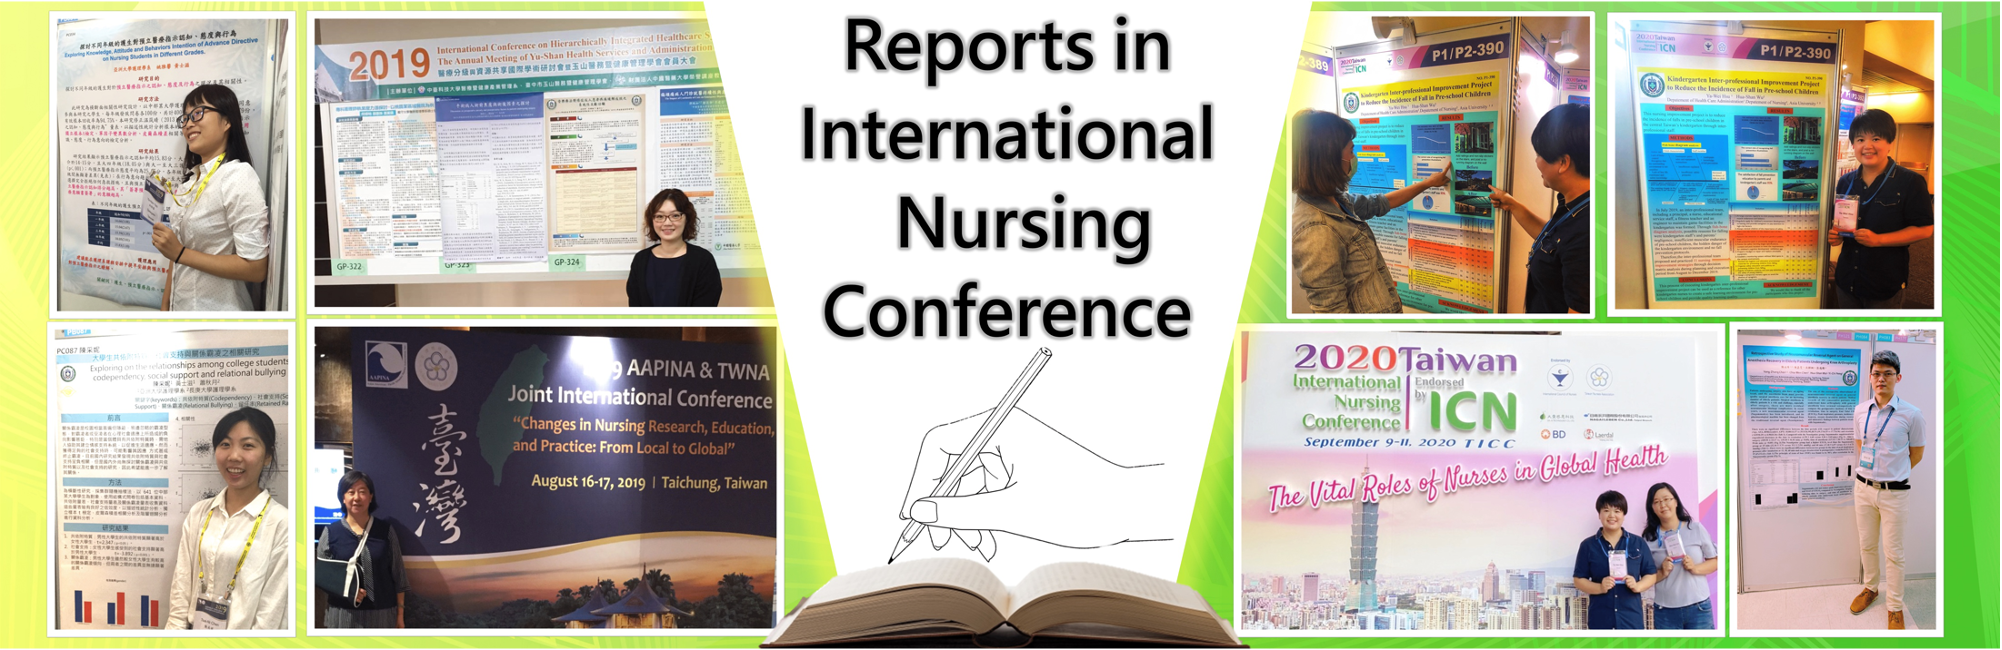 Reports in International Nursing Conference